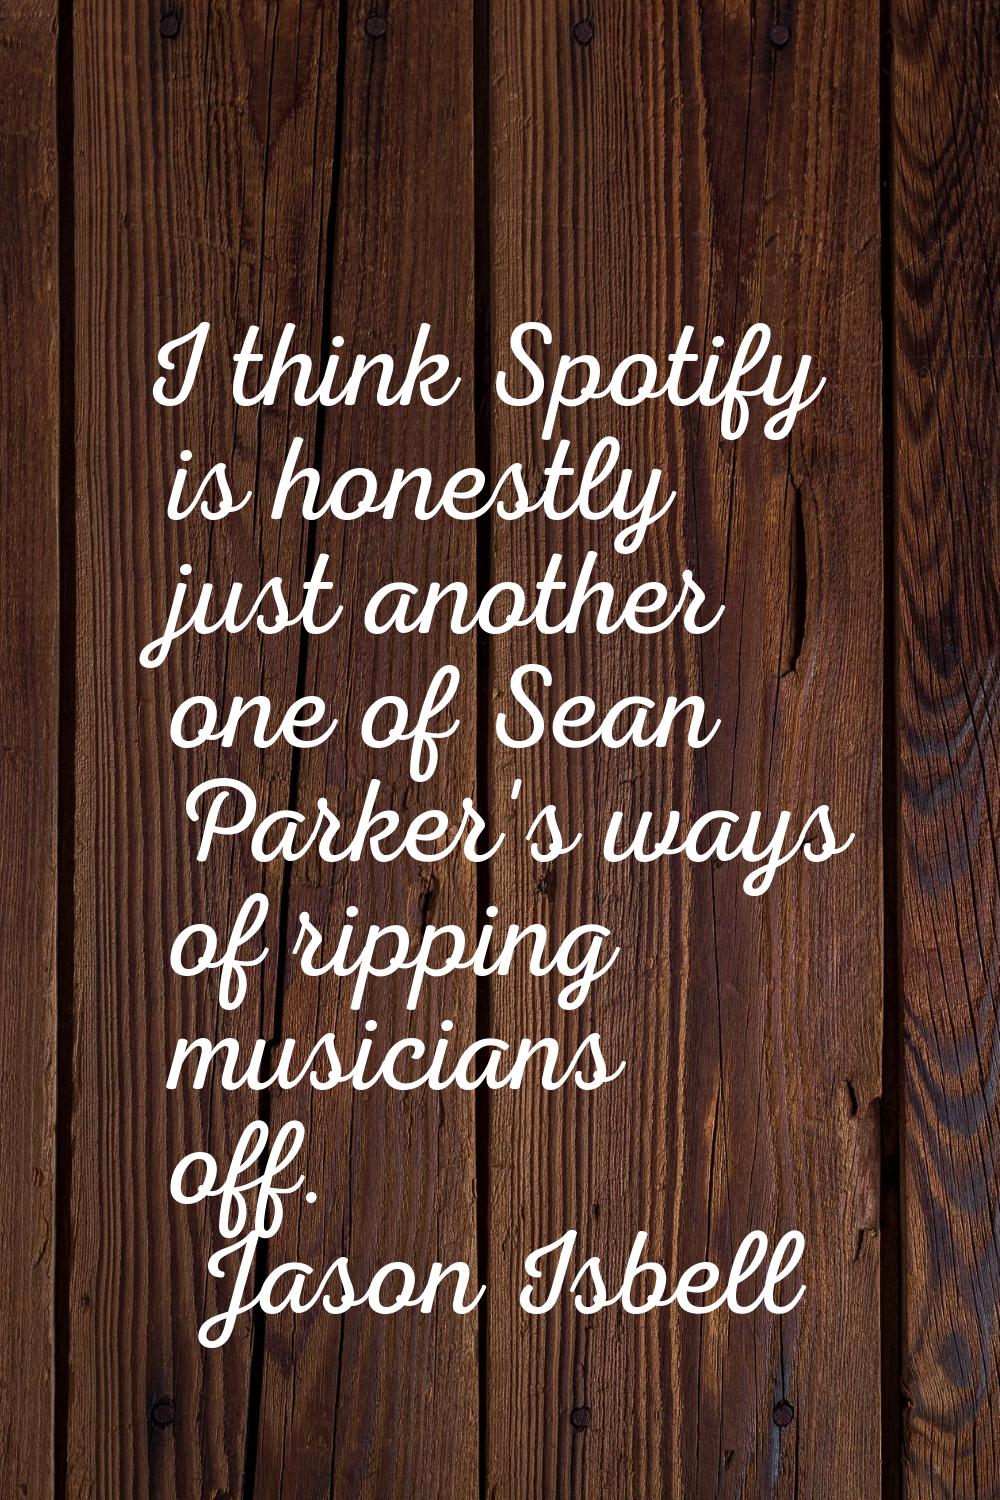 I think Spotify is honestly just another one of Sean Parker's ways of ripping musicians off.